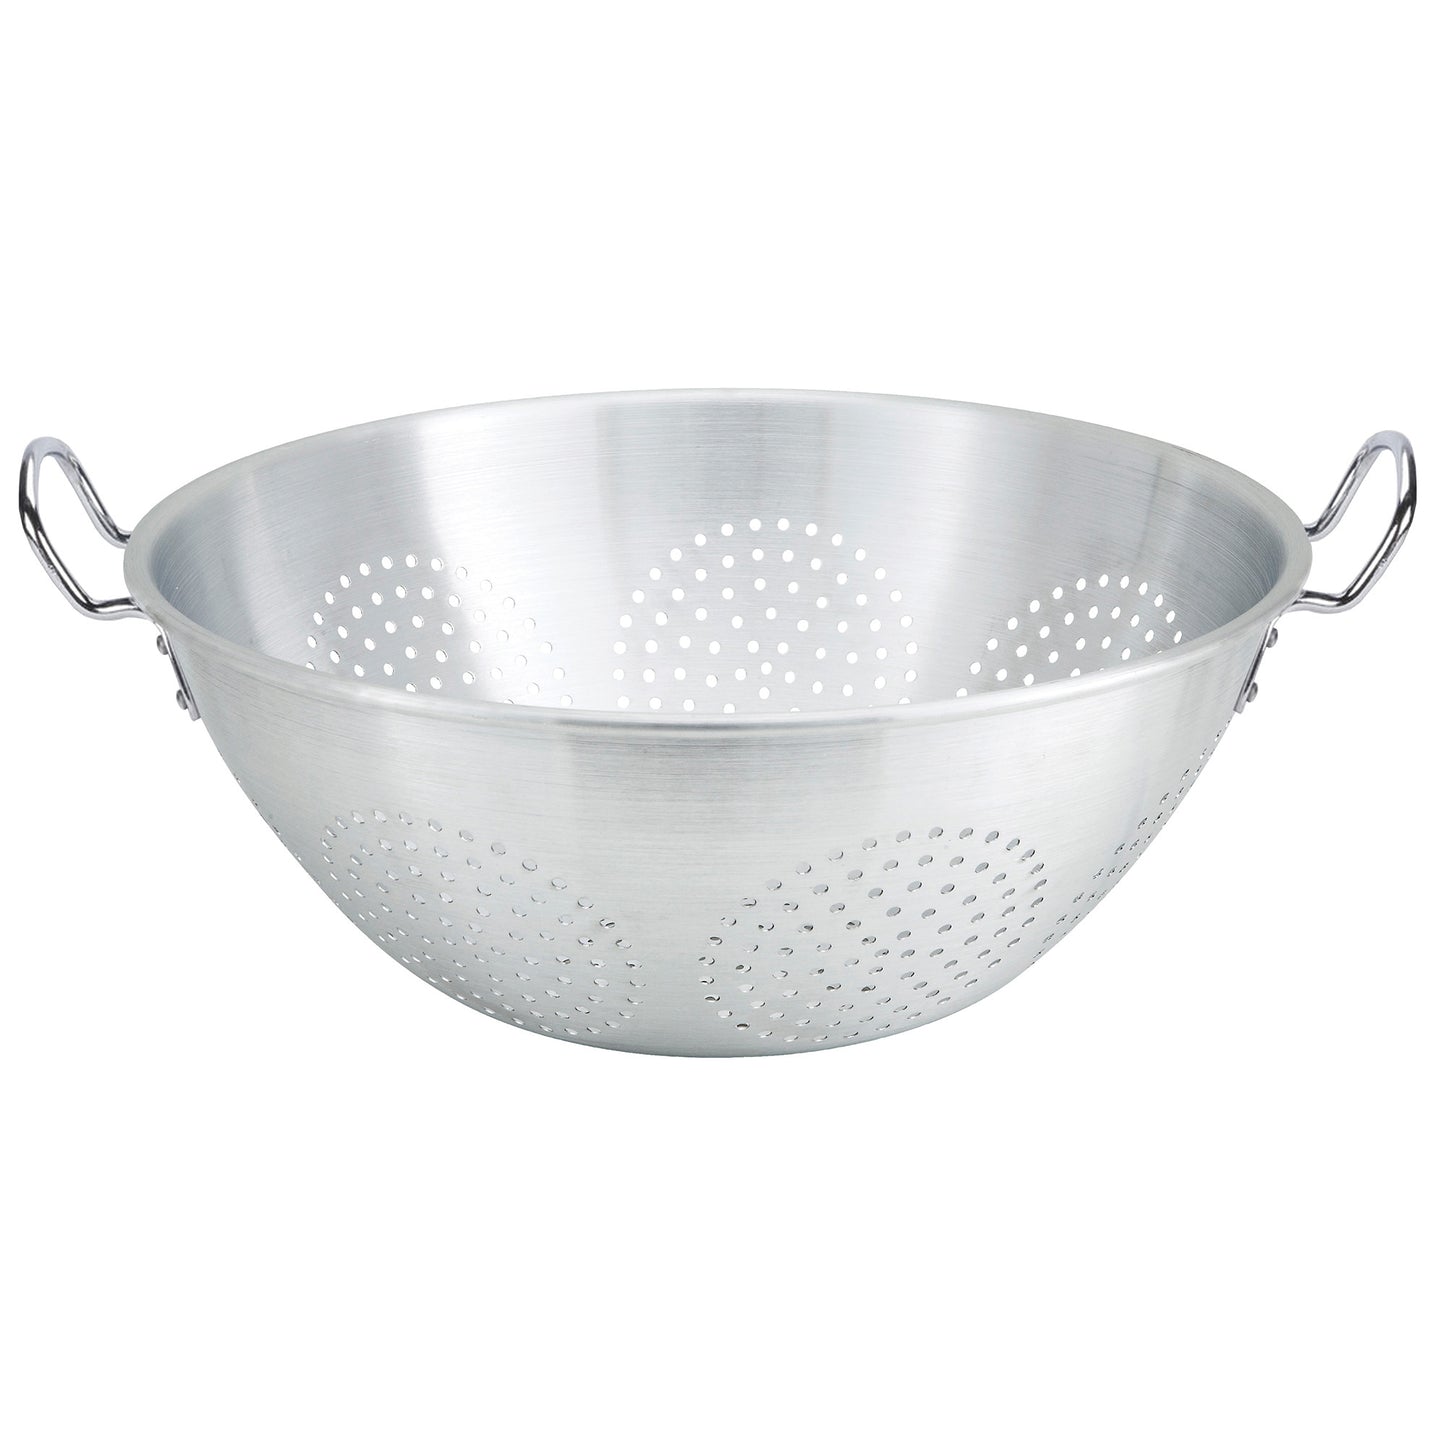 ALO-16H - 16 Quart Tapered Colander with Handles